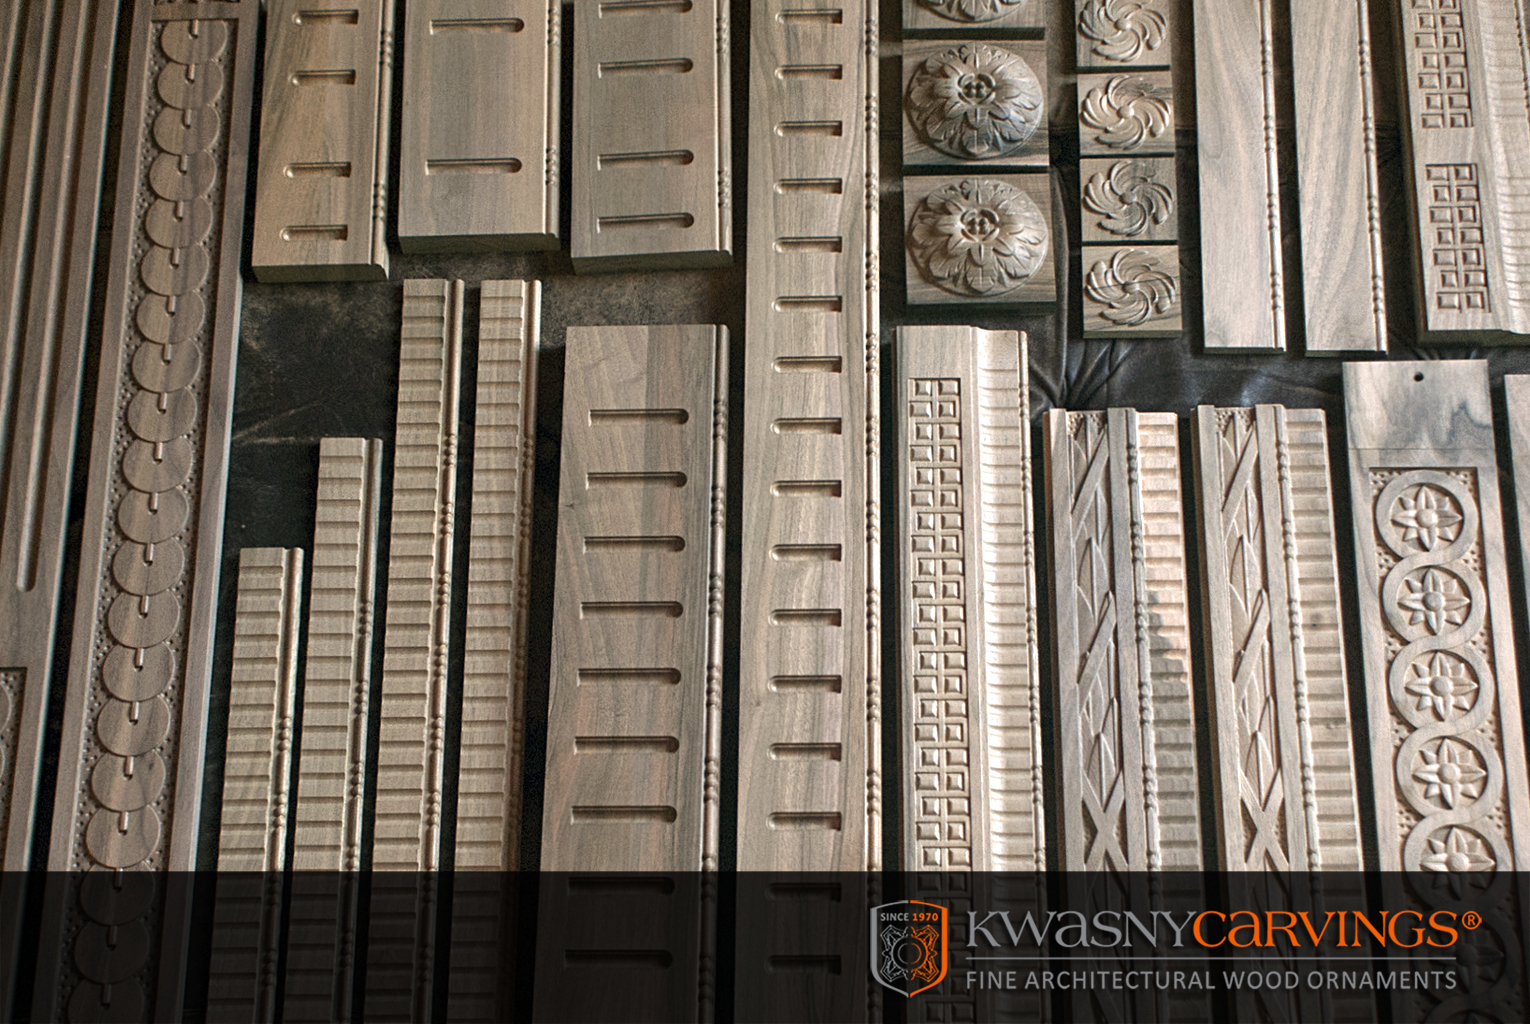 Wooden carved decorative moldings.